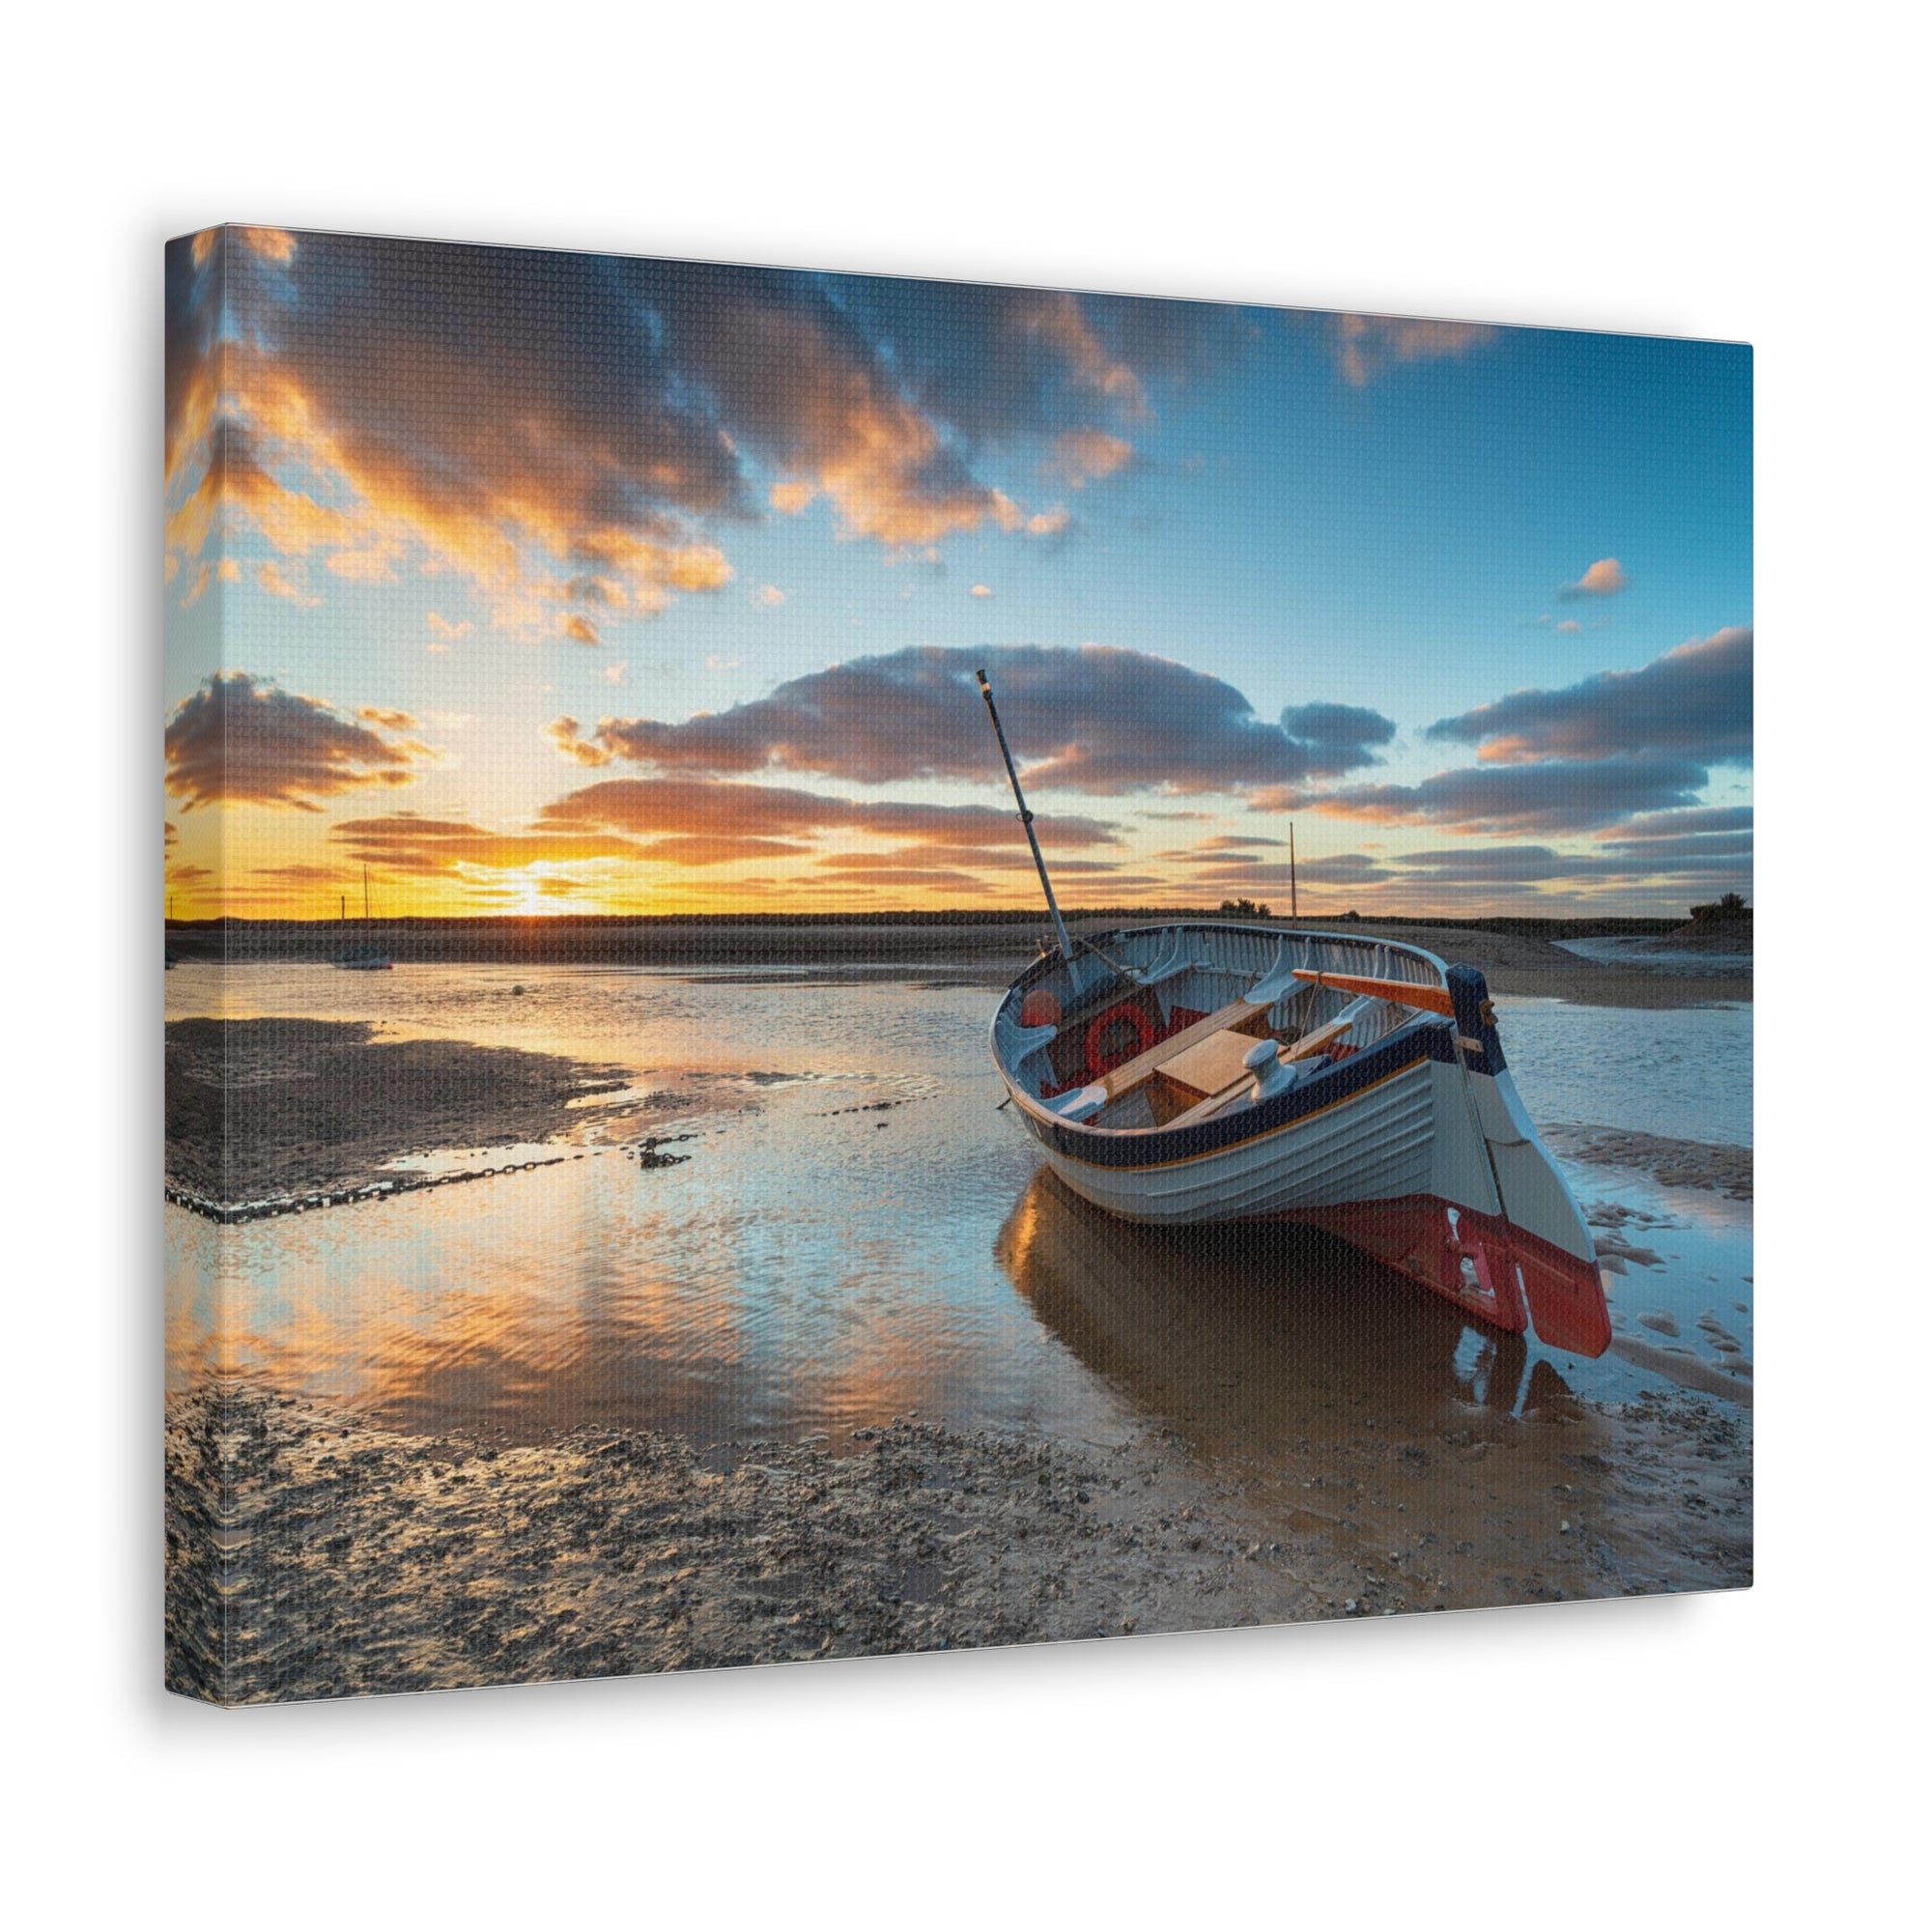 Stunning Sunset Over Fishing Boat Ocean Canvas Wall Art for Home Decor  Ready-to-Hang